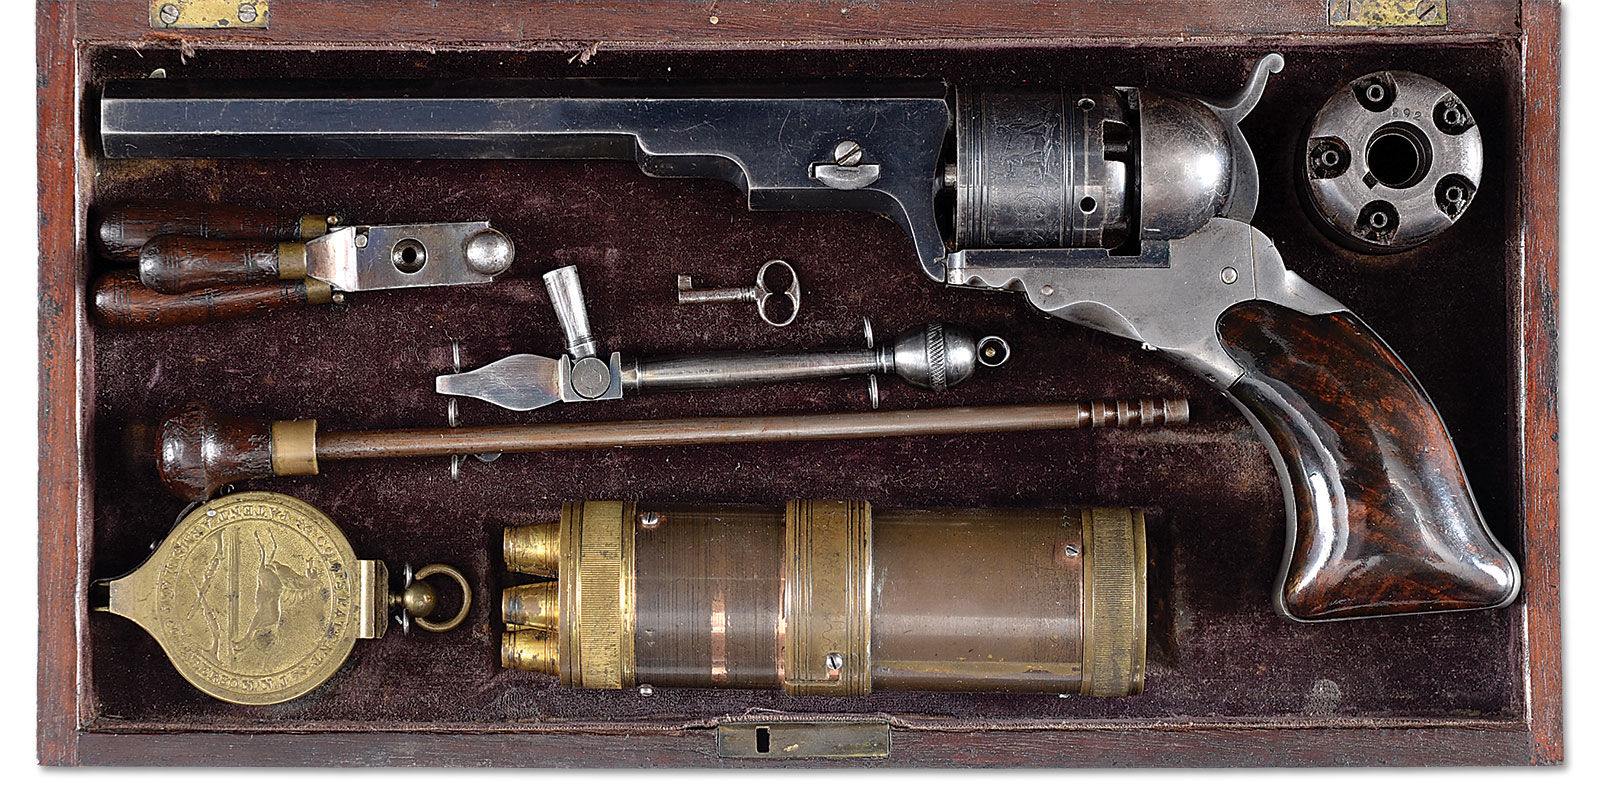 Extremely Rare Cased Colt No. 5 Holster Model Texas Paterson Percussion Revolver, Sold for $345,000